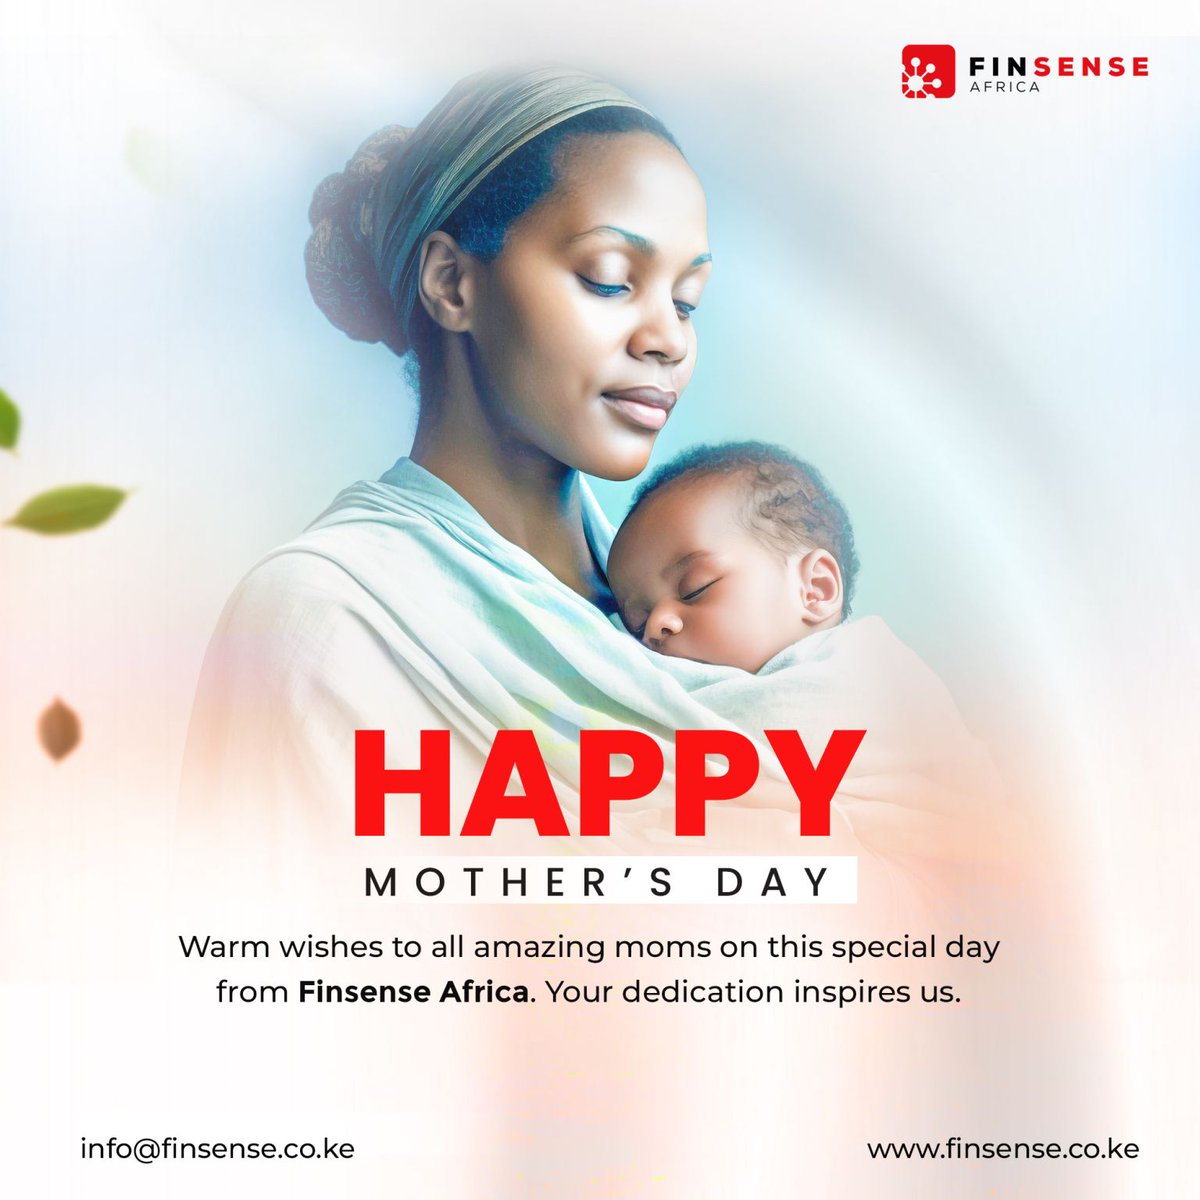 Finsense Africa wishes all mothers a Happy Mother's Day!

#MothersDay #HappyMothersDay